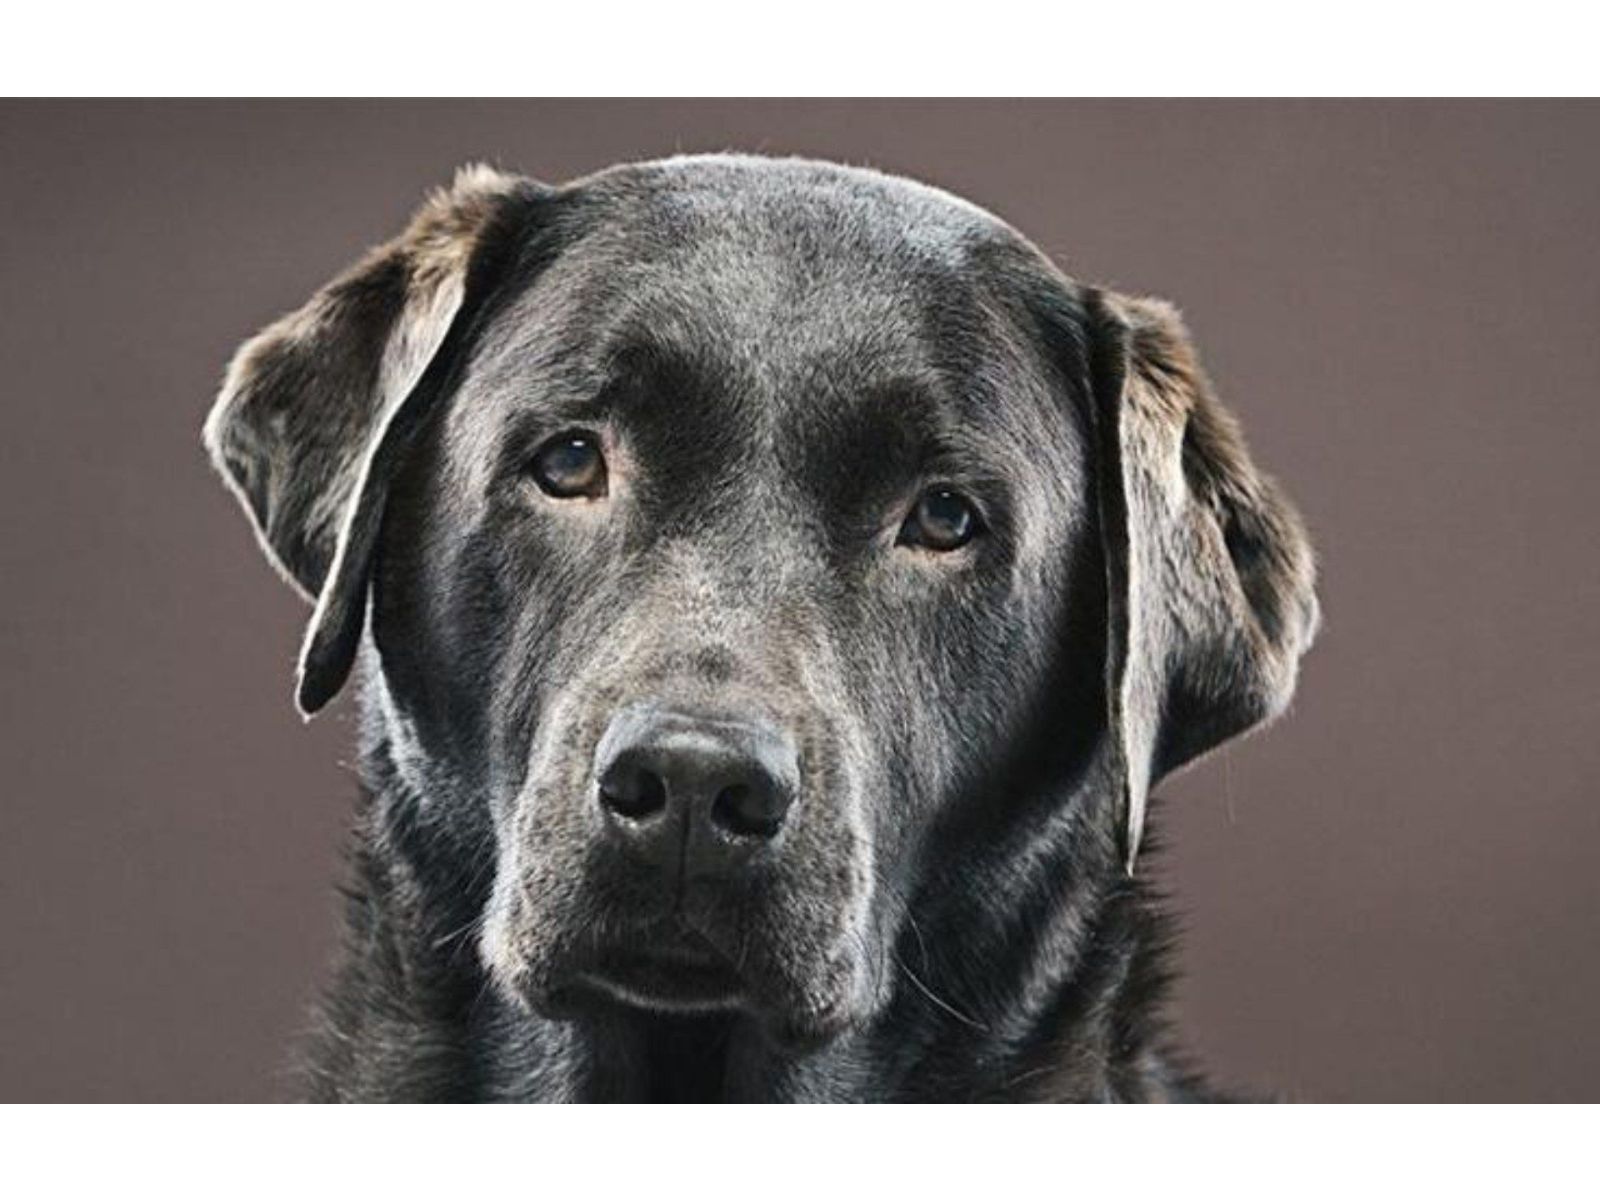 WHAT IS CANINE MASTICATORY MUSCULAR MYOSITIS?